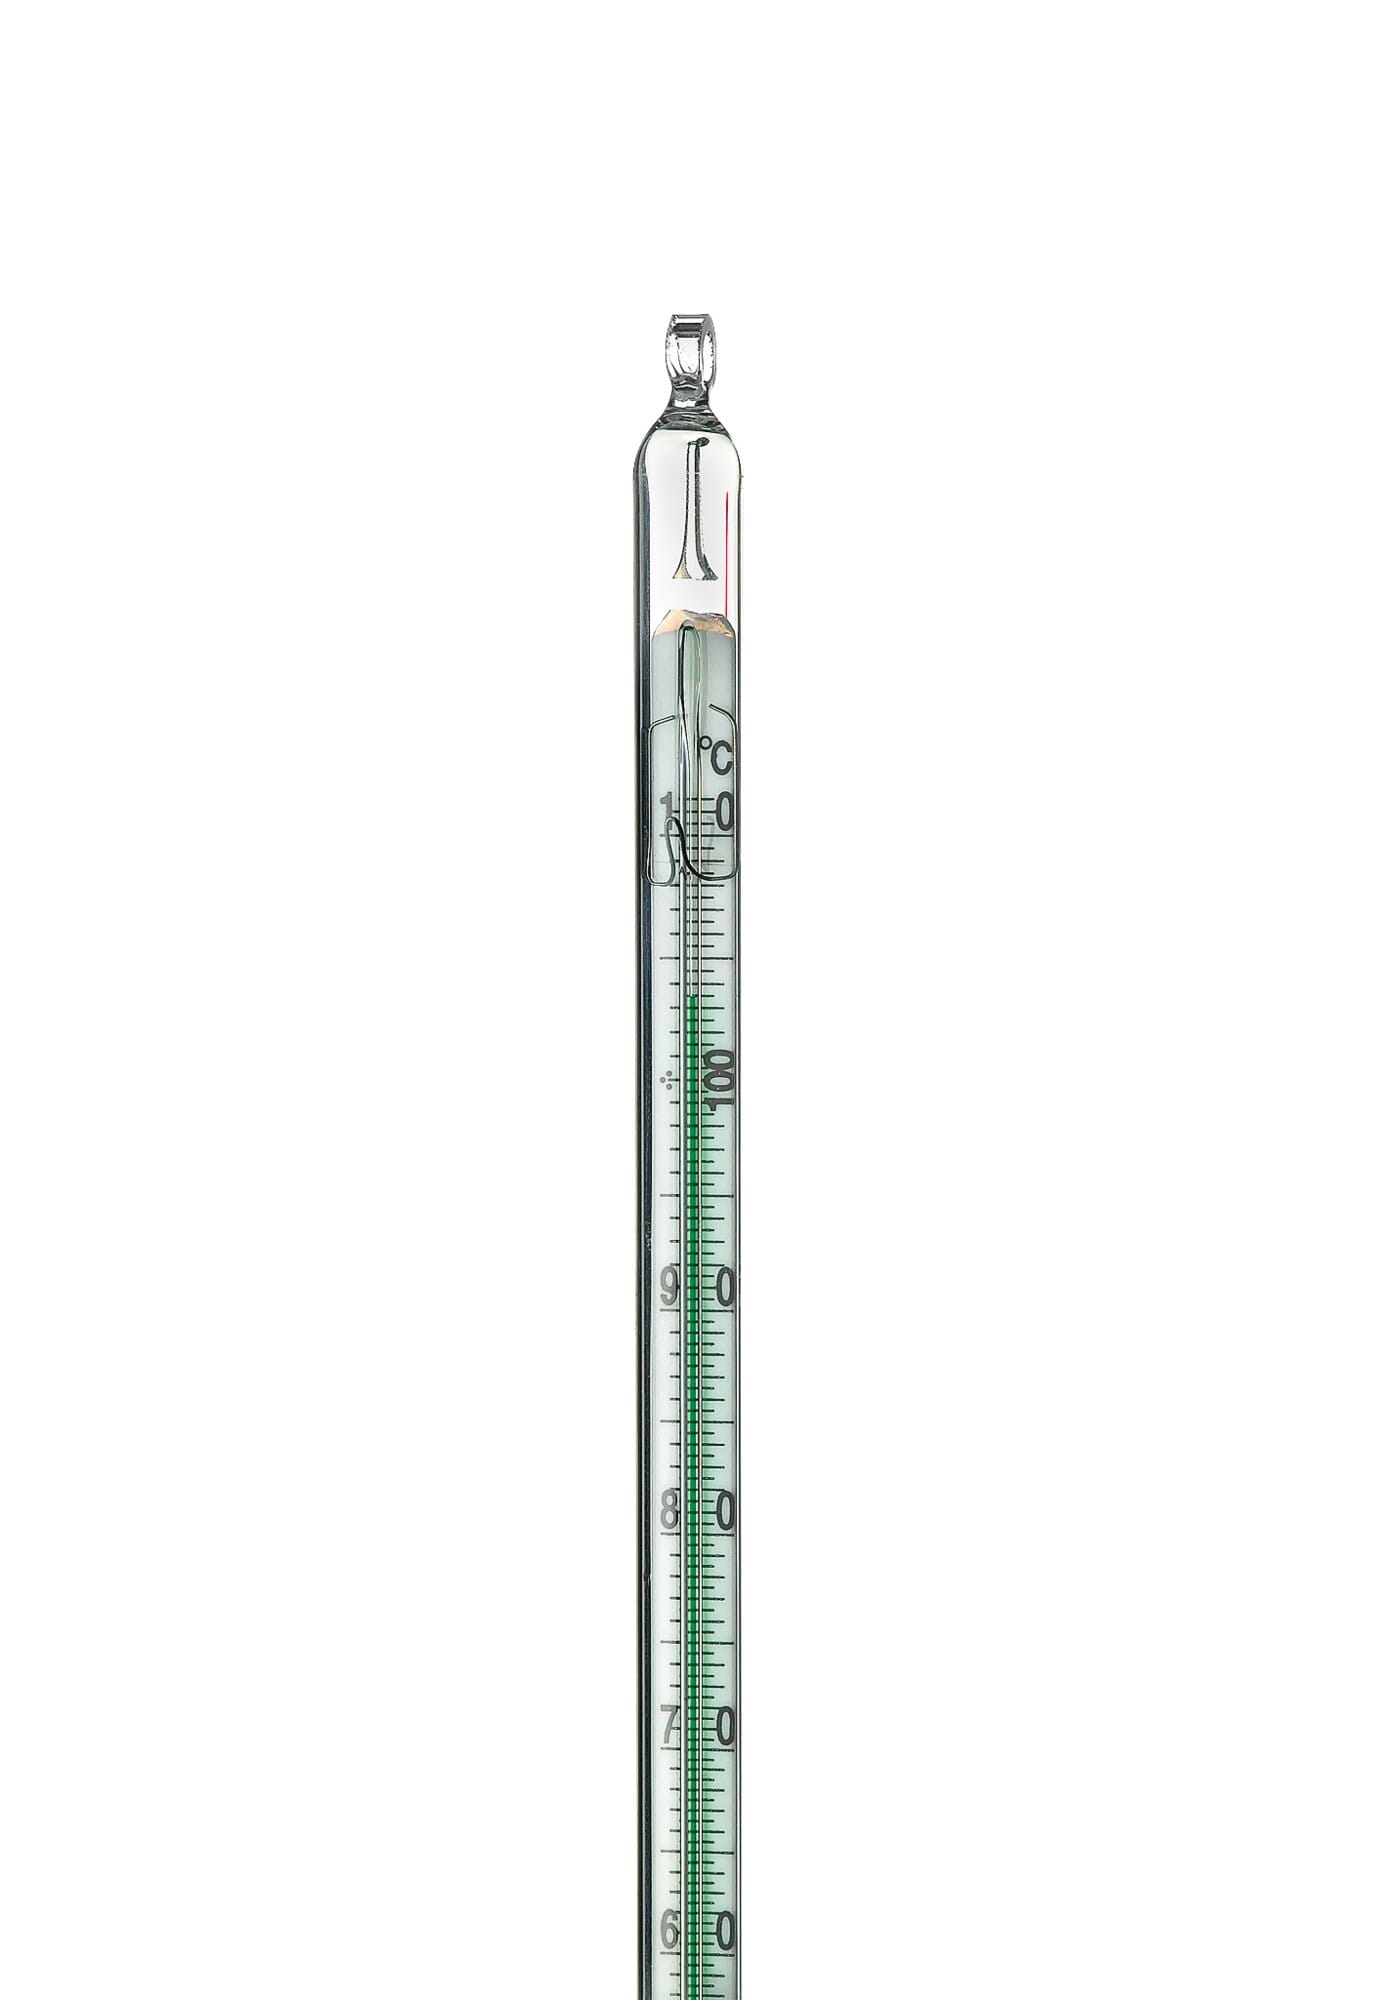 laboratory thermometer labeled